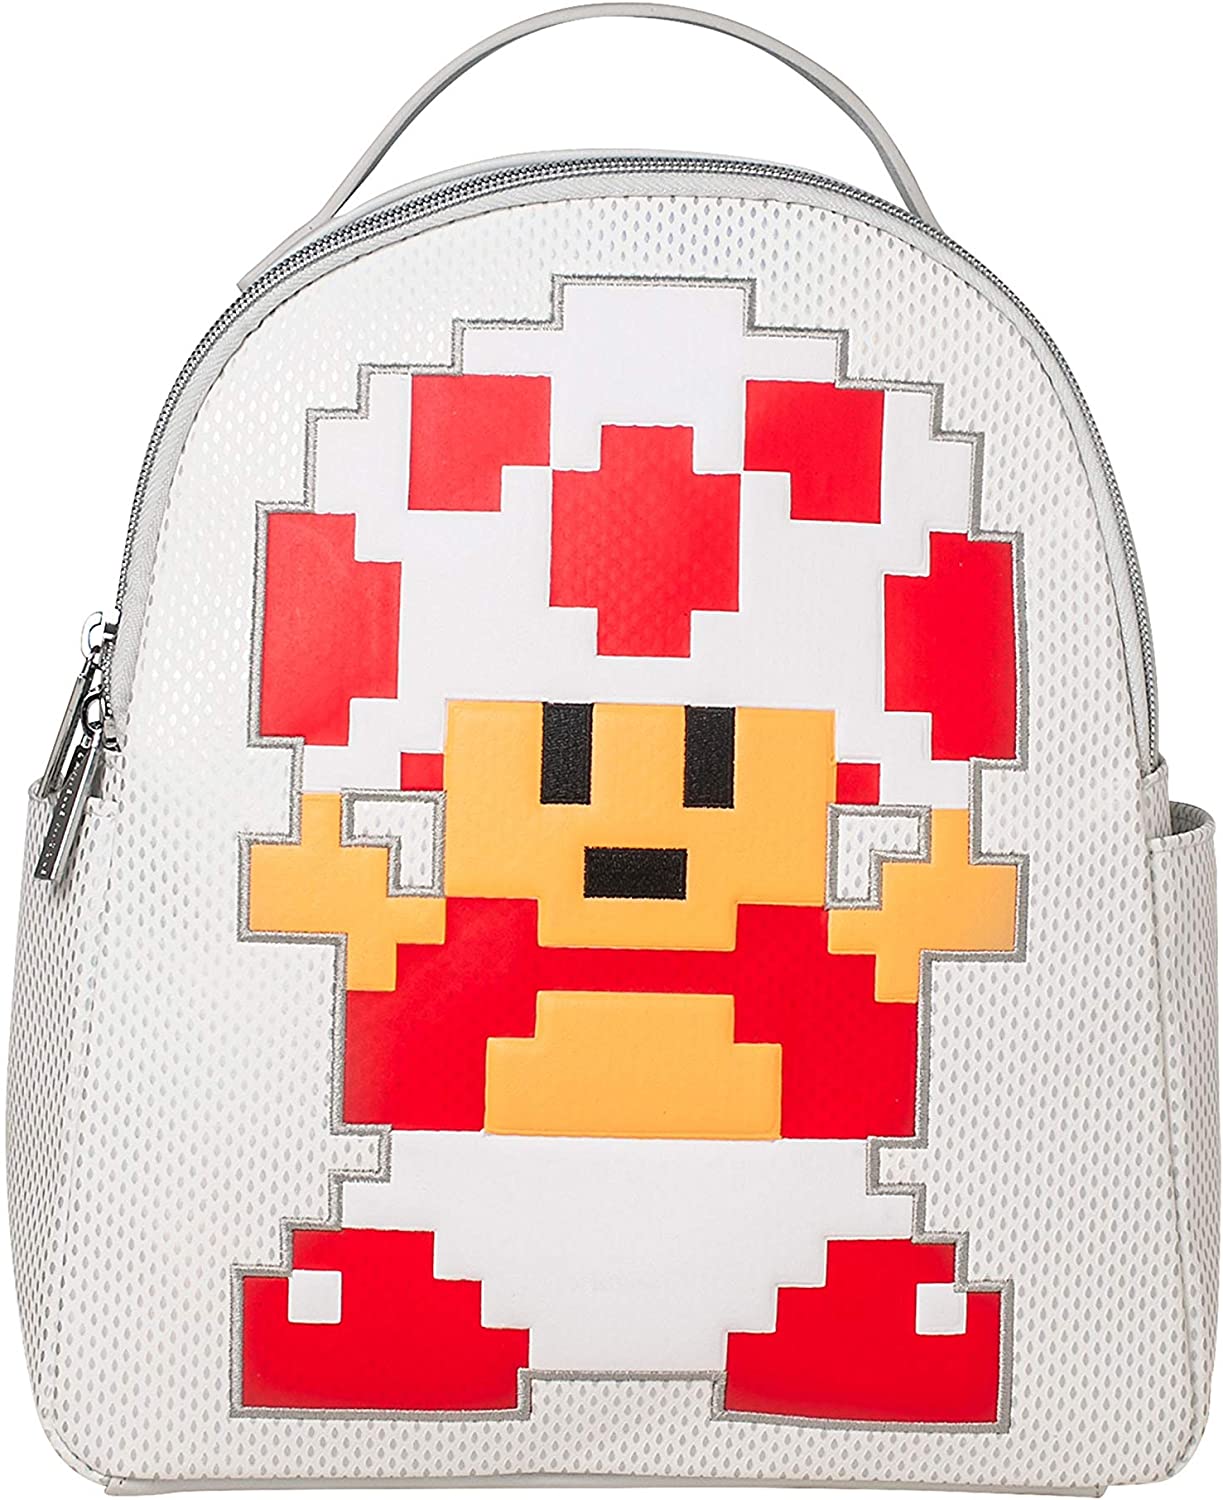 Danielle Nicole Super Mario Toad backpack front view